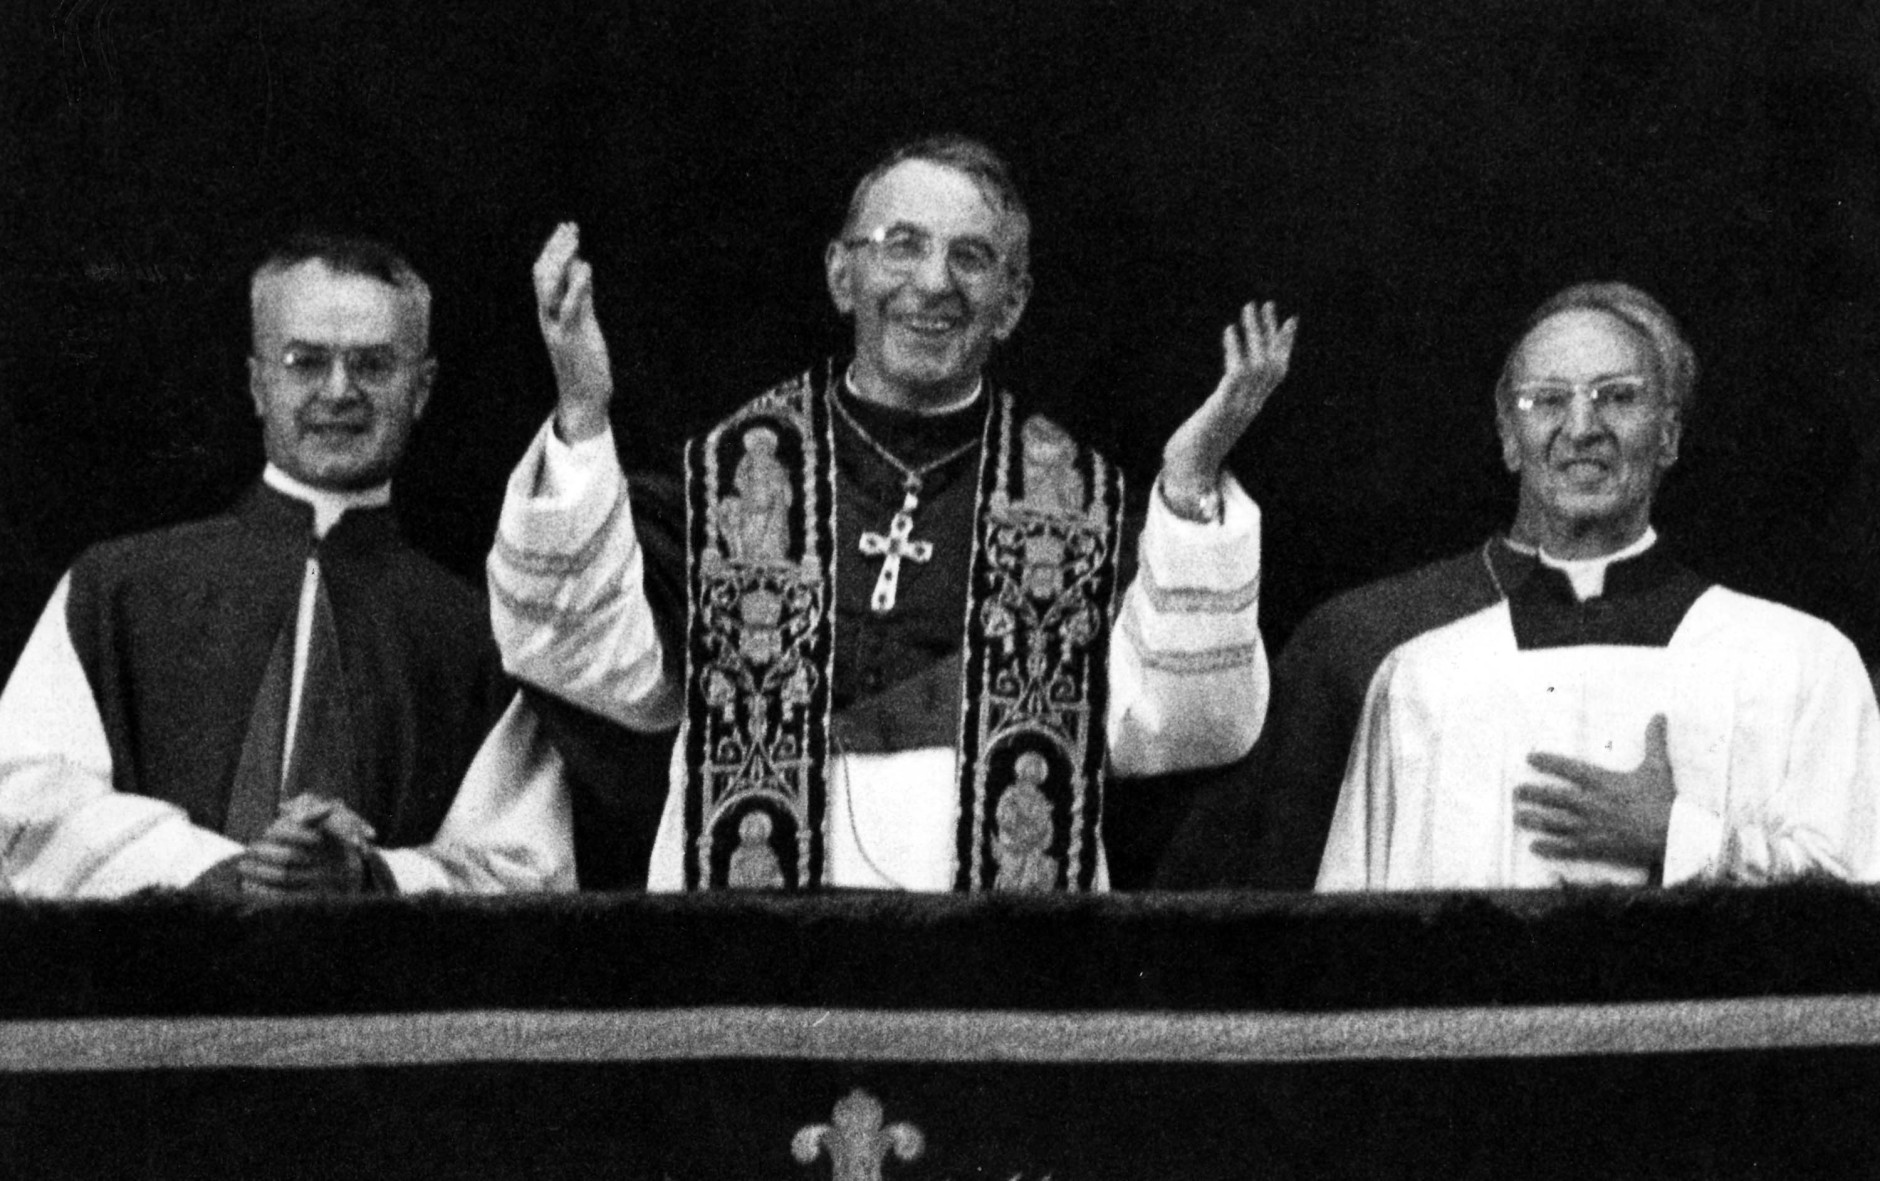 Pope John Paul I smiles and waves with both hands to crowd filling St. Peter's Square Aug. 26, 1978 when the former patriarch of Venice appeared on the balcony of St. Peter's Basilica, short time after the white smoke coming out of the chimney of the Sistine Chapel, indicating that the conclavists had elected a successor for Pope Paul VI. He is flanked by Msgr. Virgilio Noe', master of the pontifical office, right, and Msgr. Orazio Cocchetti, left, also of the pontifical ceremonies office. (Ap Photo)